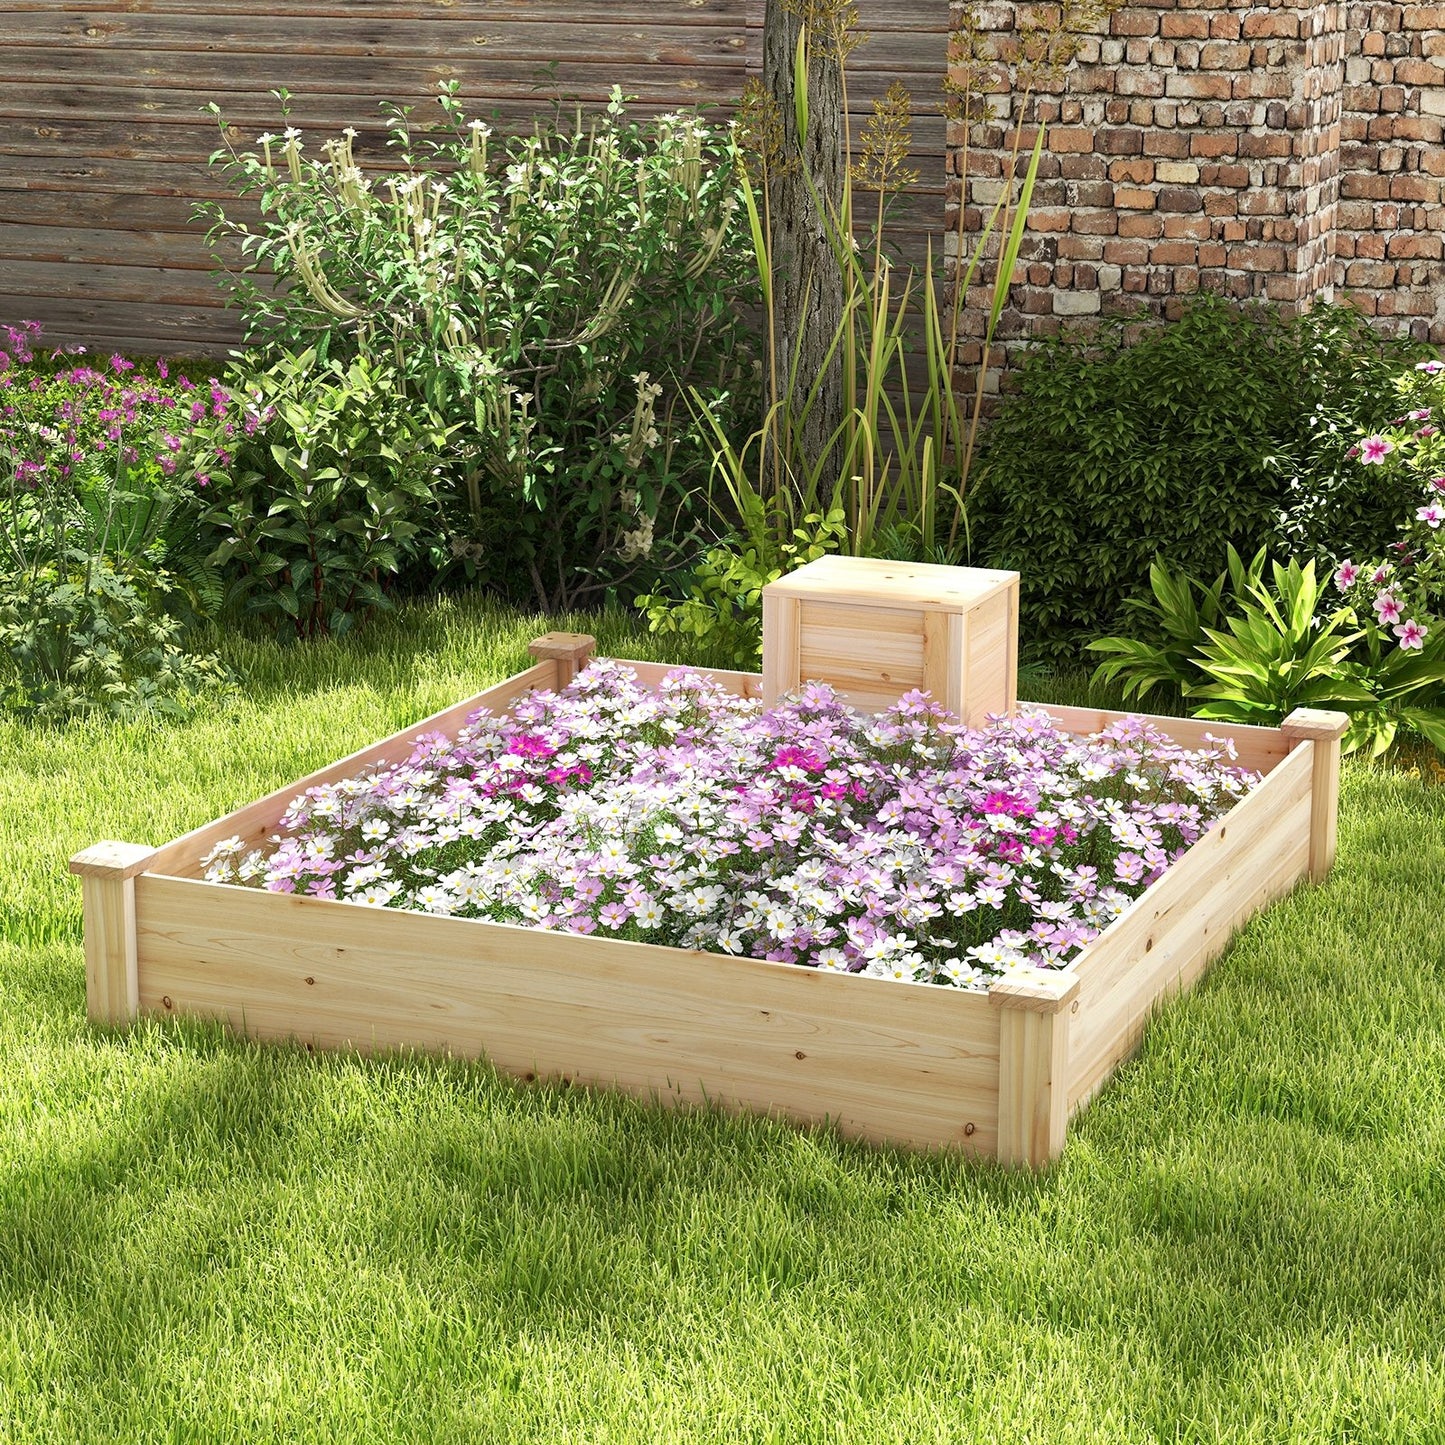 49" x 49" x 10" Raised Garden Bed with Compost Bin and Open-ended Bottom, Natural